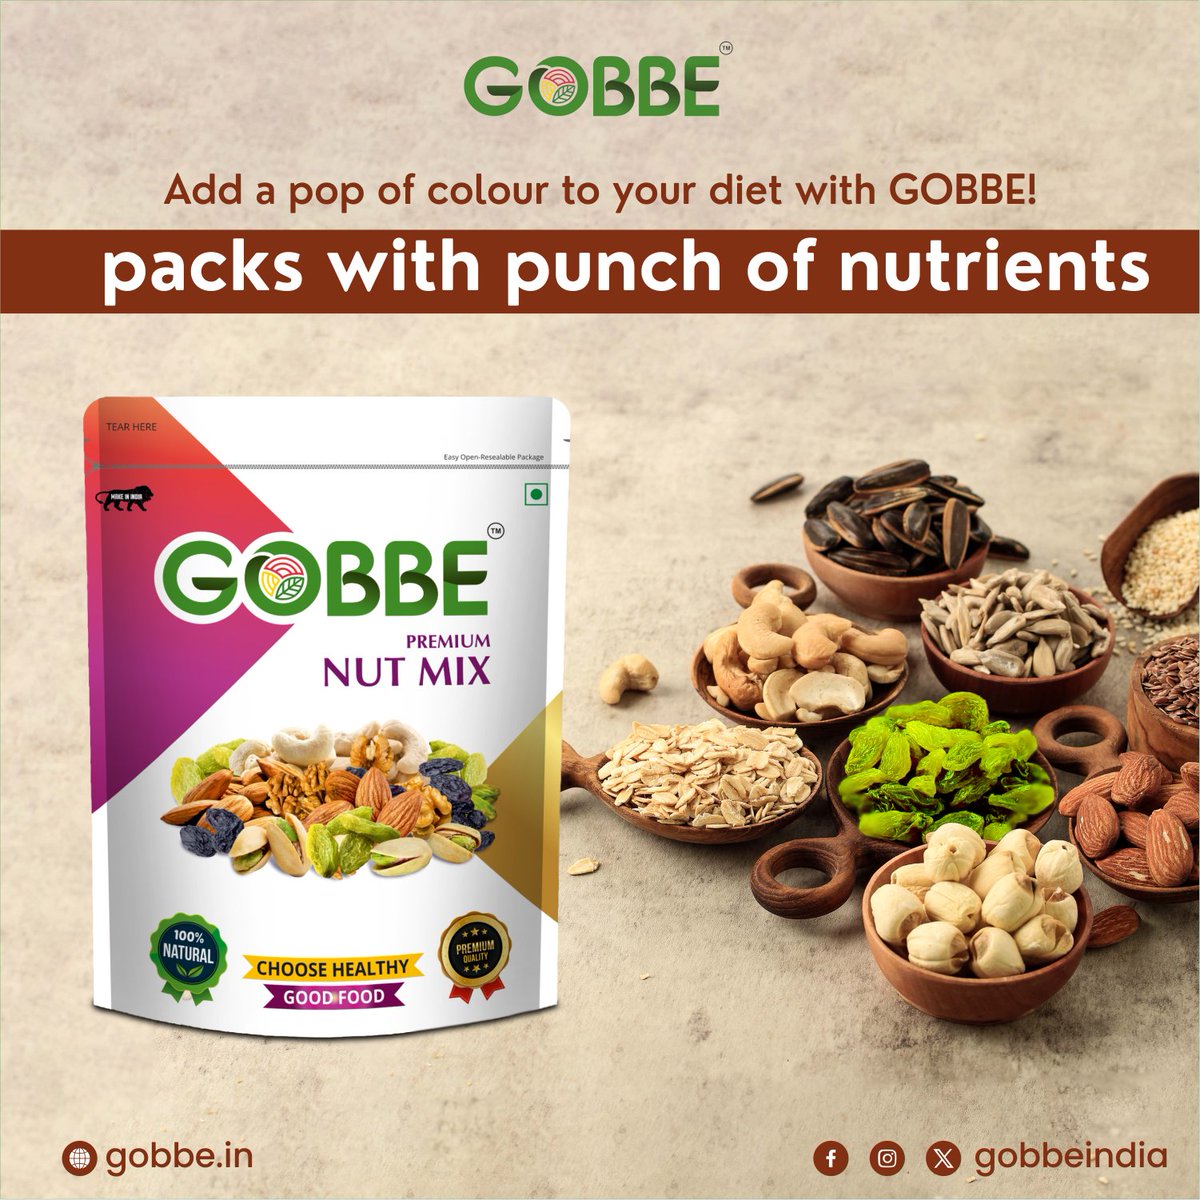 Add a pop of color to your diet with GOBBE!
Visit our food heaven now!!
linktr.ee/gobbeindia

#gobbe #healthconsciousliving #nutritionnest #premiumdryfruits #nutsandseeds #naturetreasures #qualityindulgence #healthysnacking #dryfruits #dryfruitstore #banglore #india